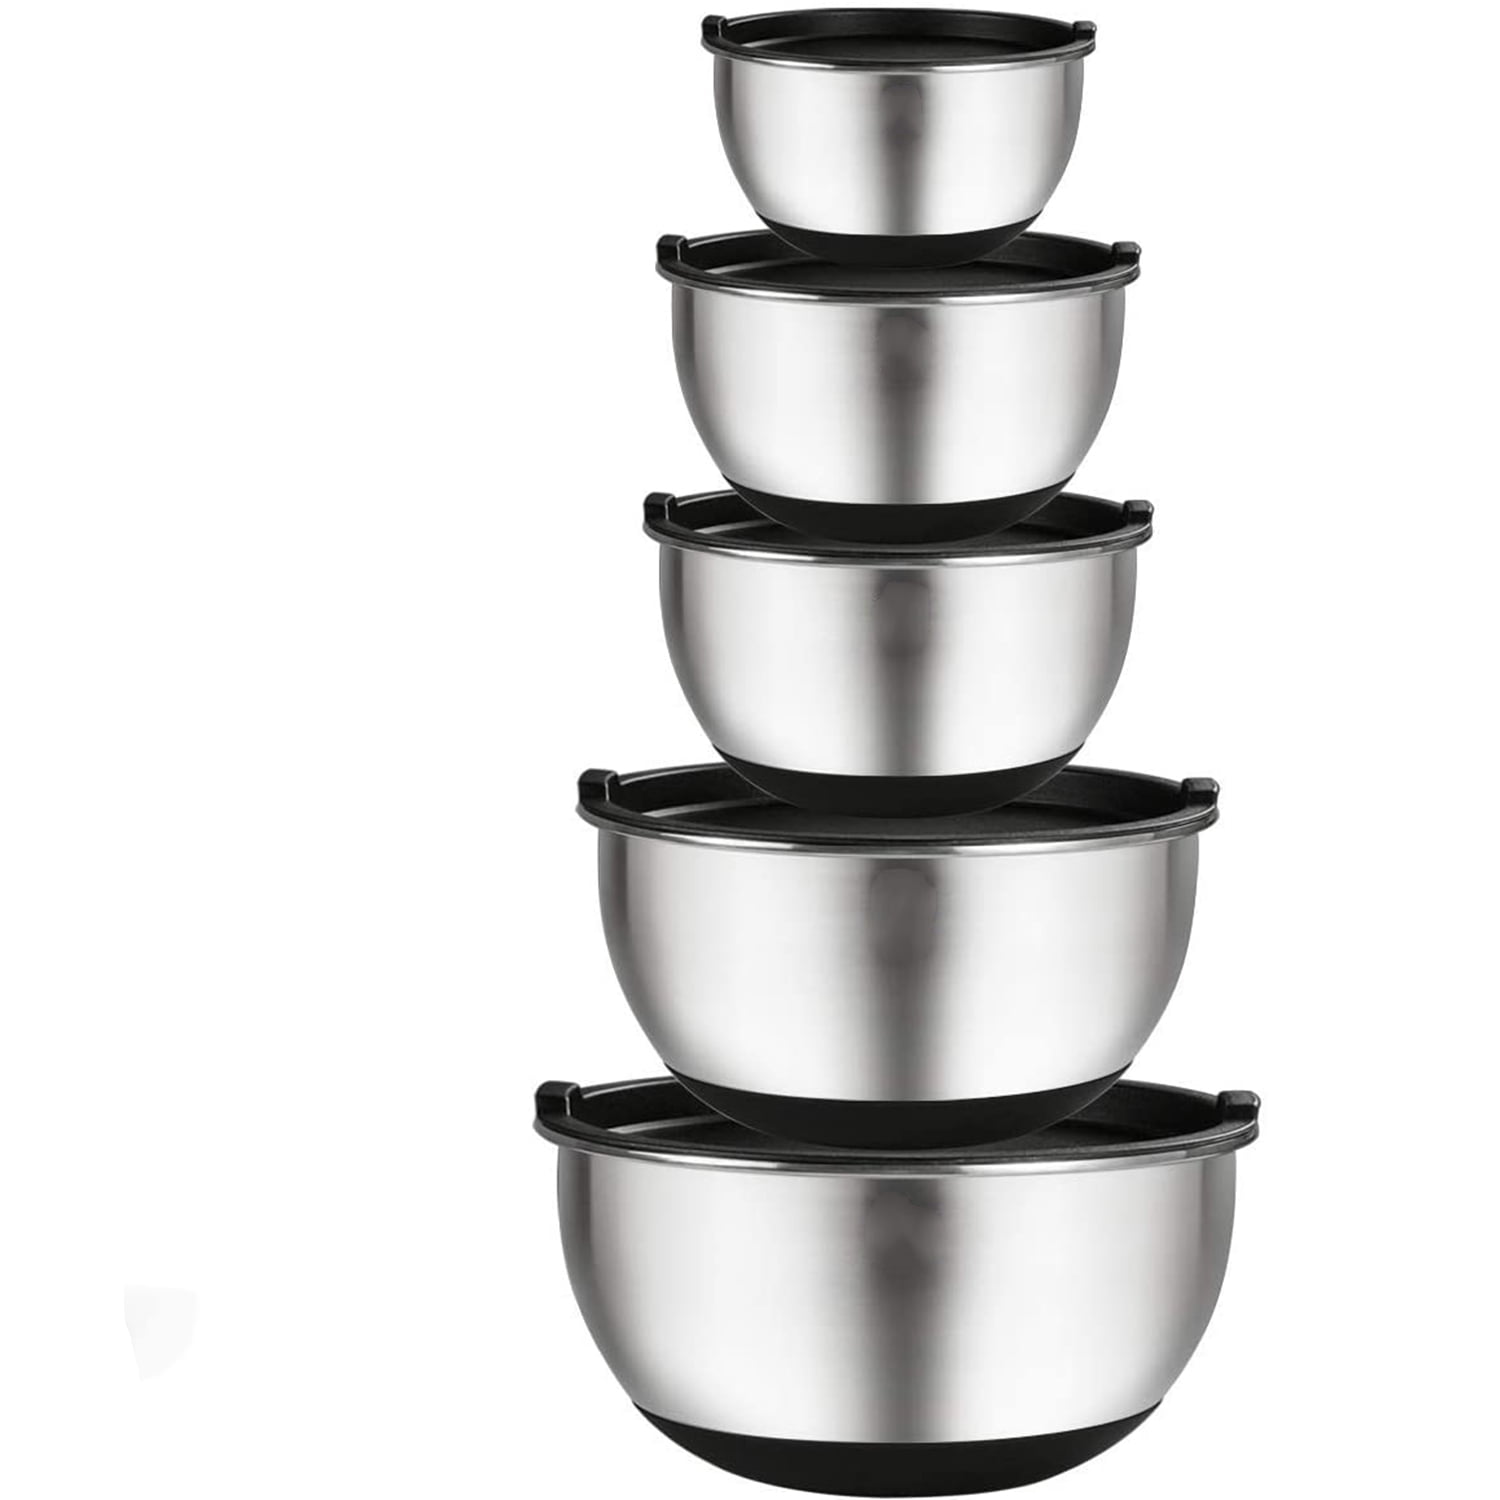 Choice Stainless Steel Standard Mixing Bowl Set with Silicone